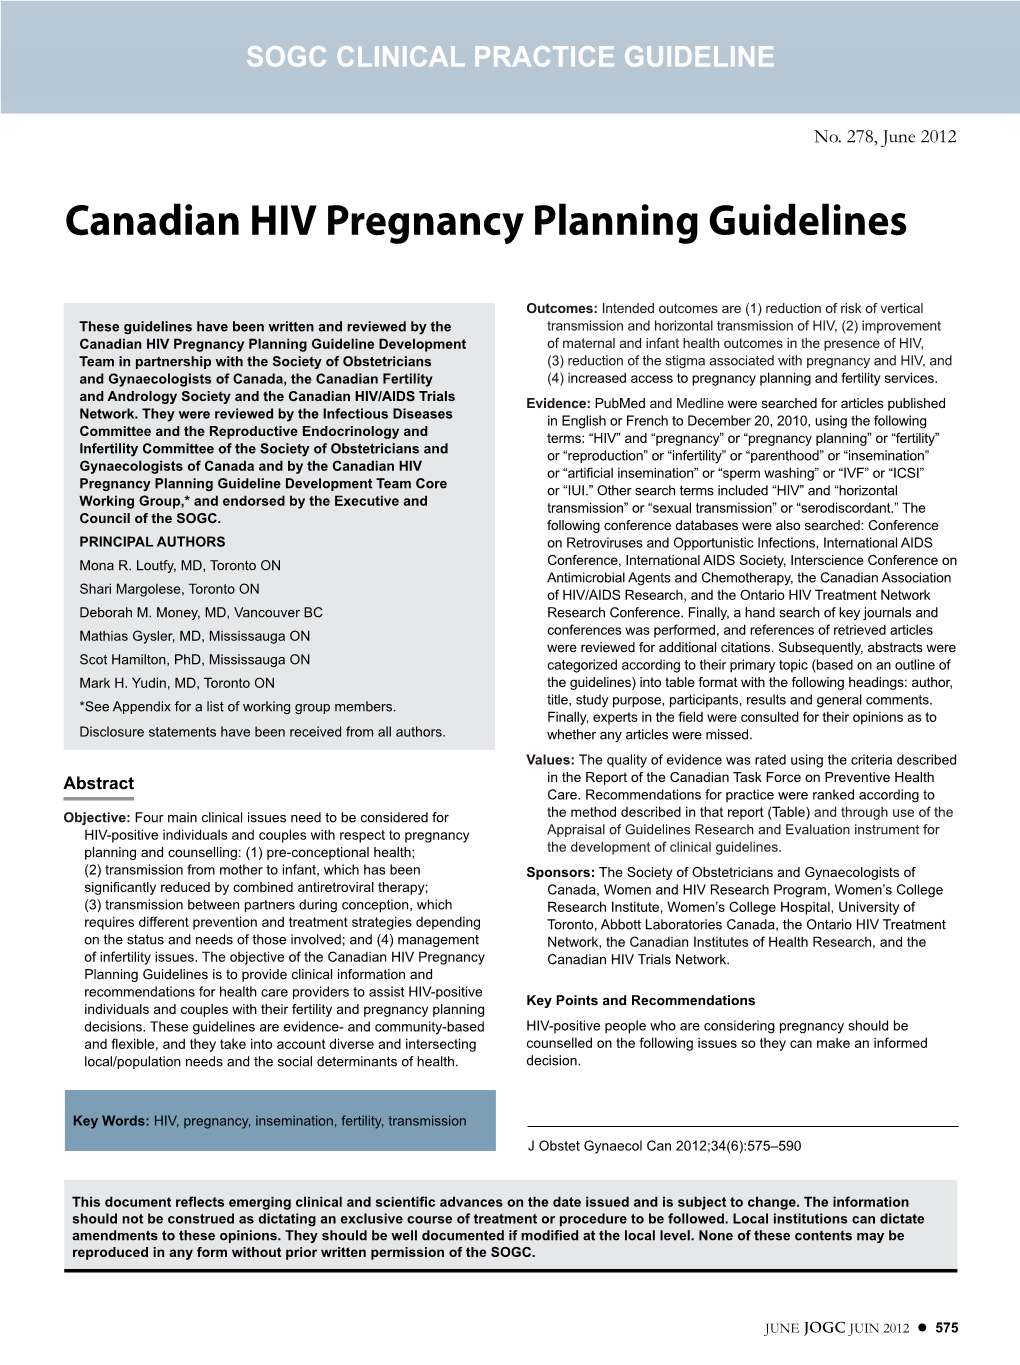 Canadian HIV Pregnancy Planning Guidelines